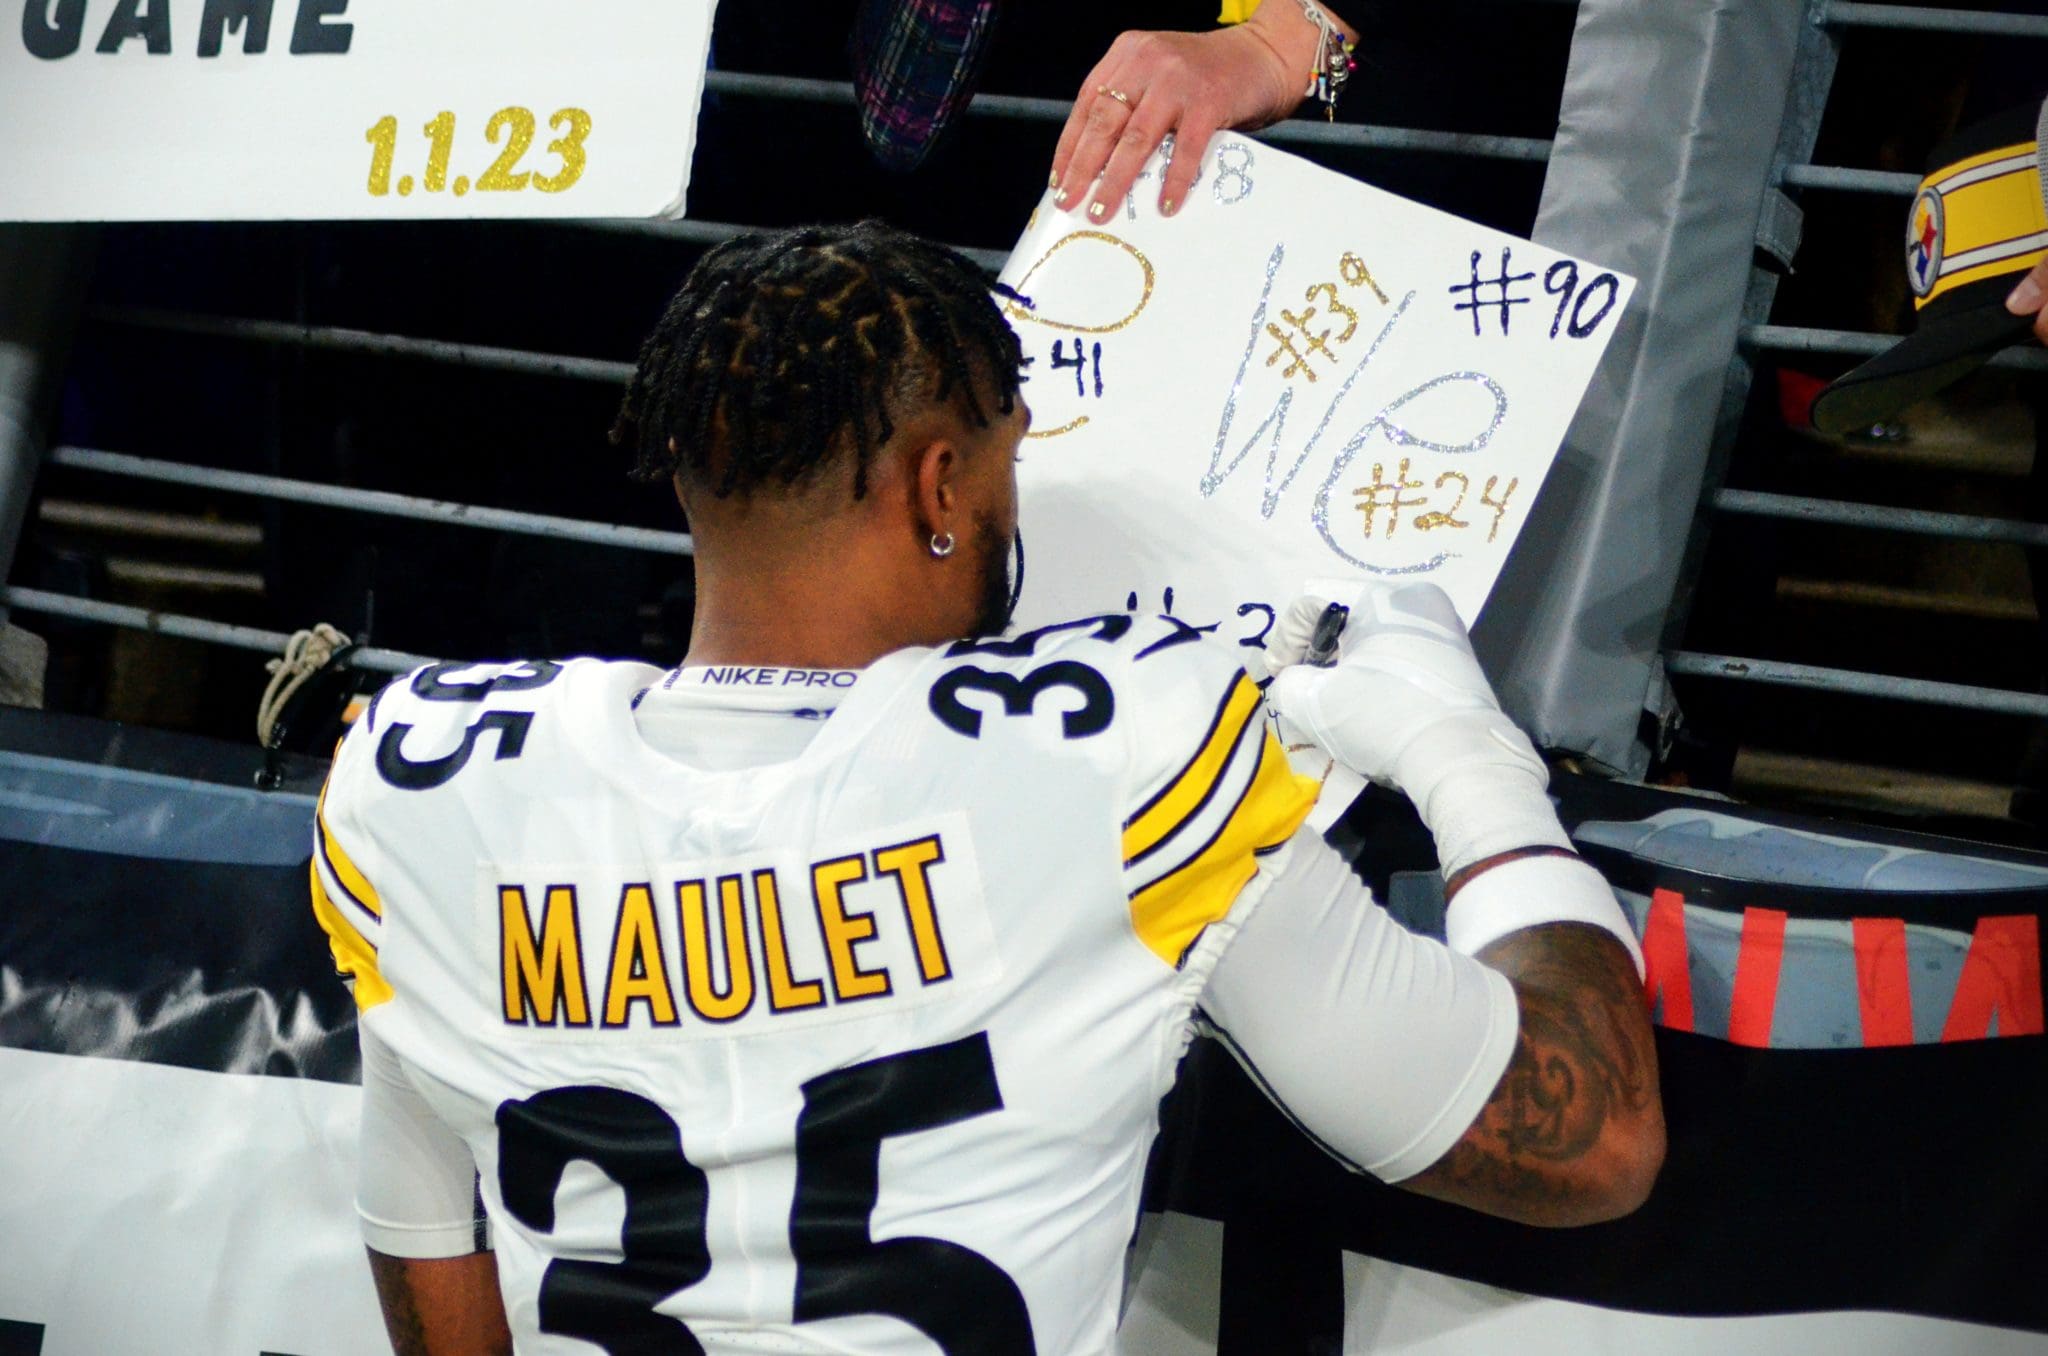 Steelers Arthur Maulet signs autographs ahead of Steelers vs. Ravens on Jan. 1, 2023 in Baltimore. (Mitchell Northam / Steelers Now)